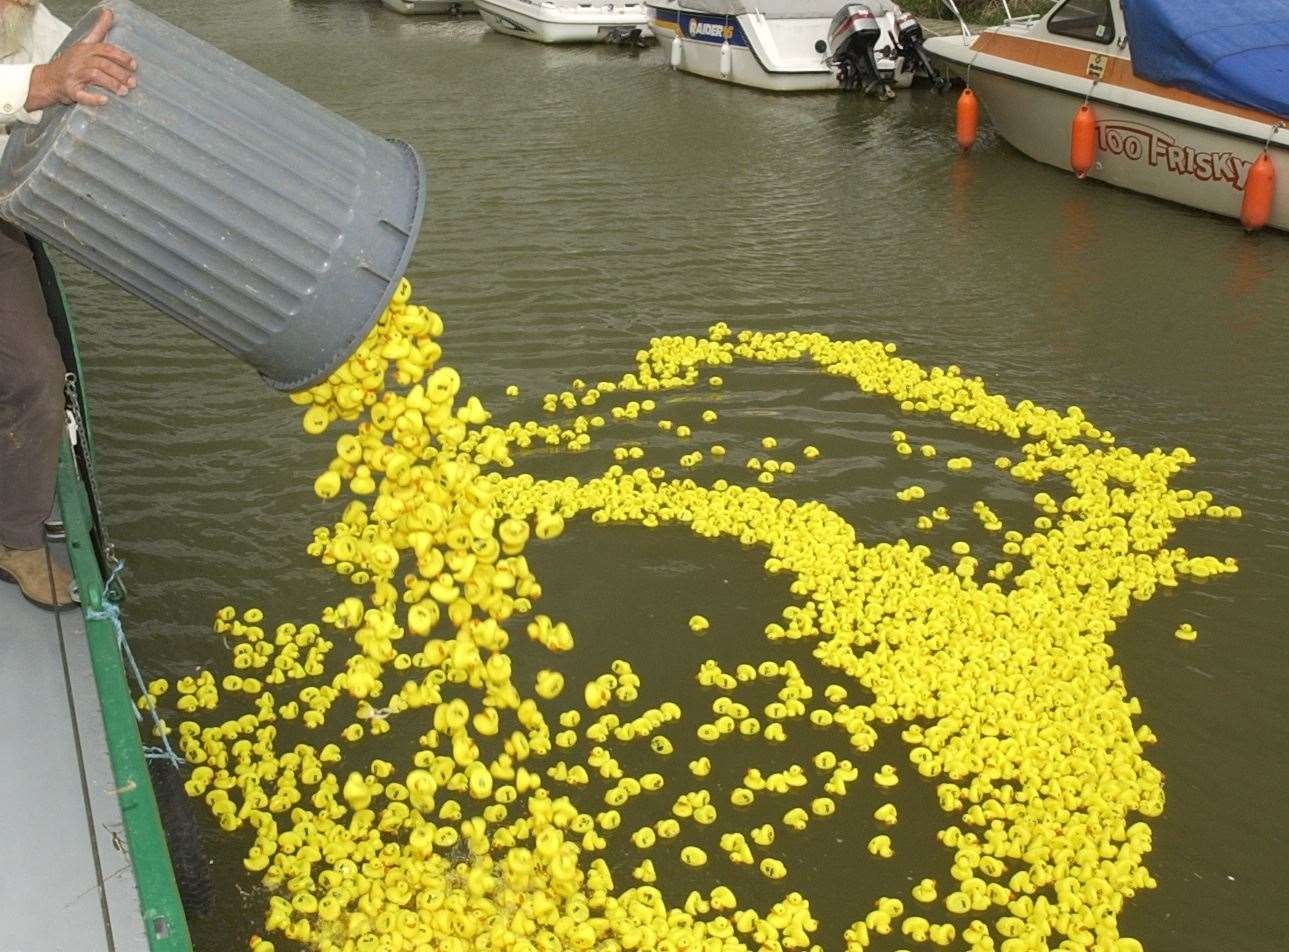 Traditionally the Duck Race takes place on the River Stour in Sandwich